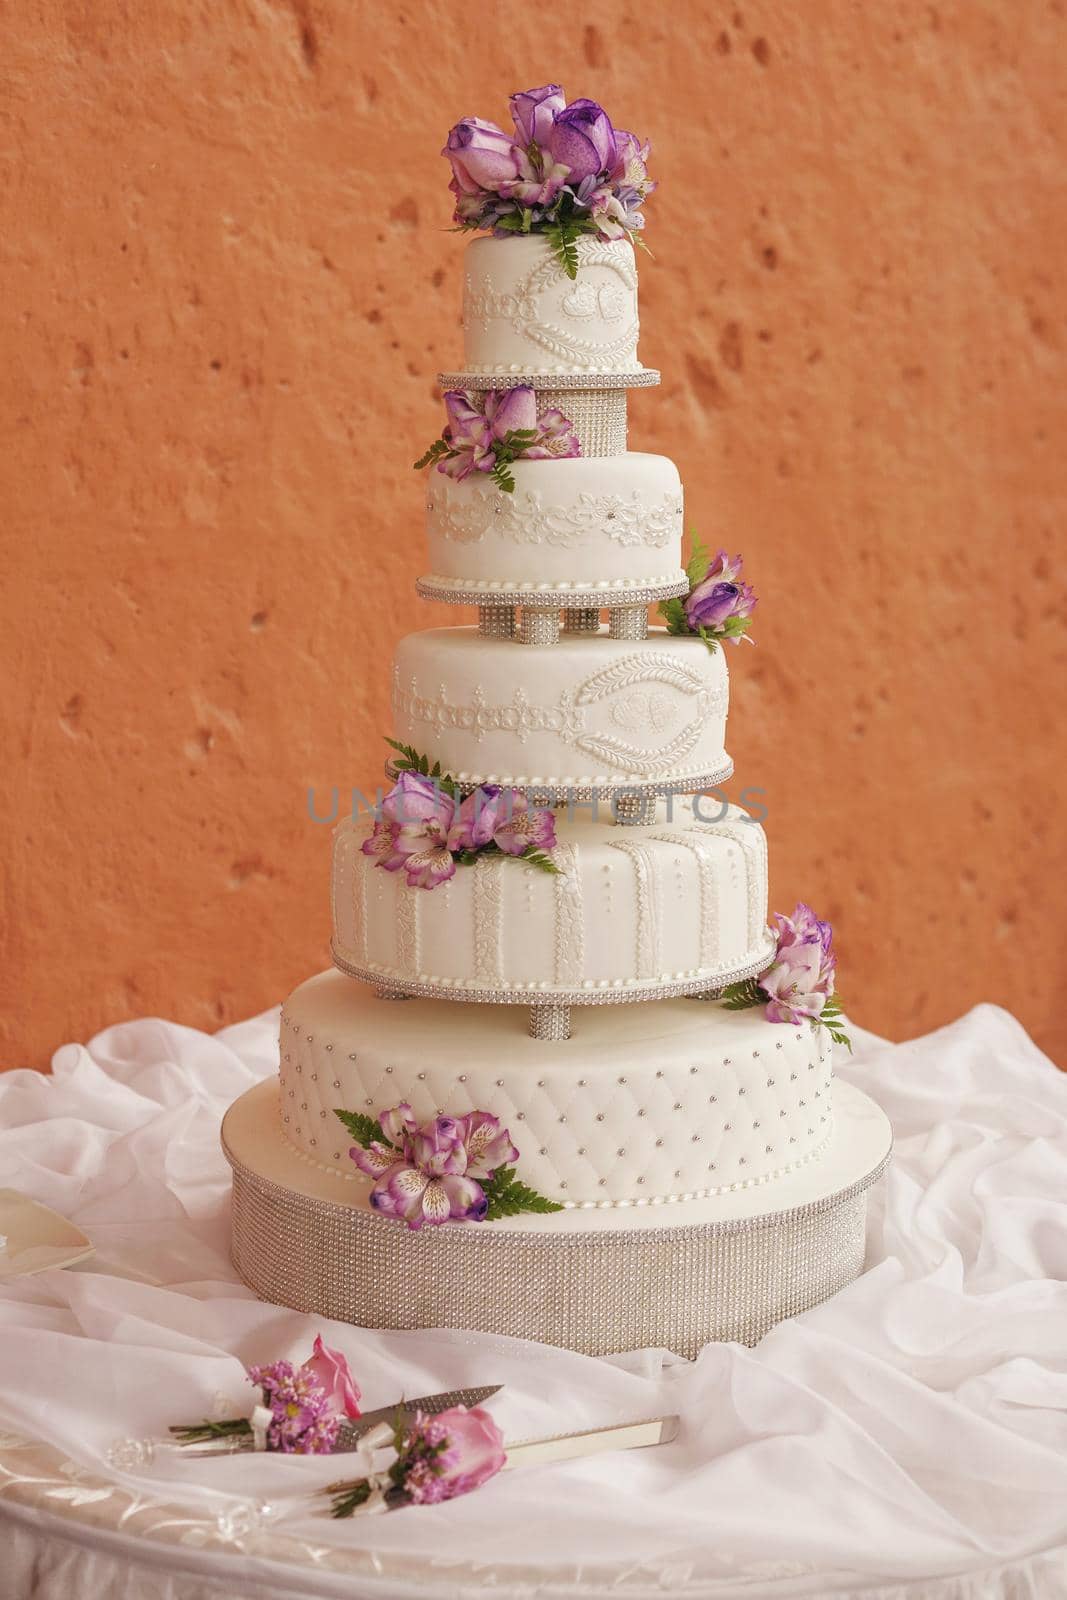 White wedding cake decorated with flowers